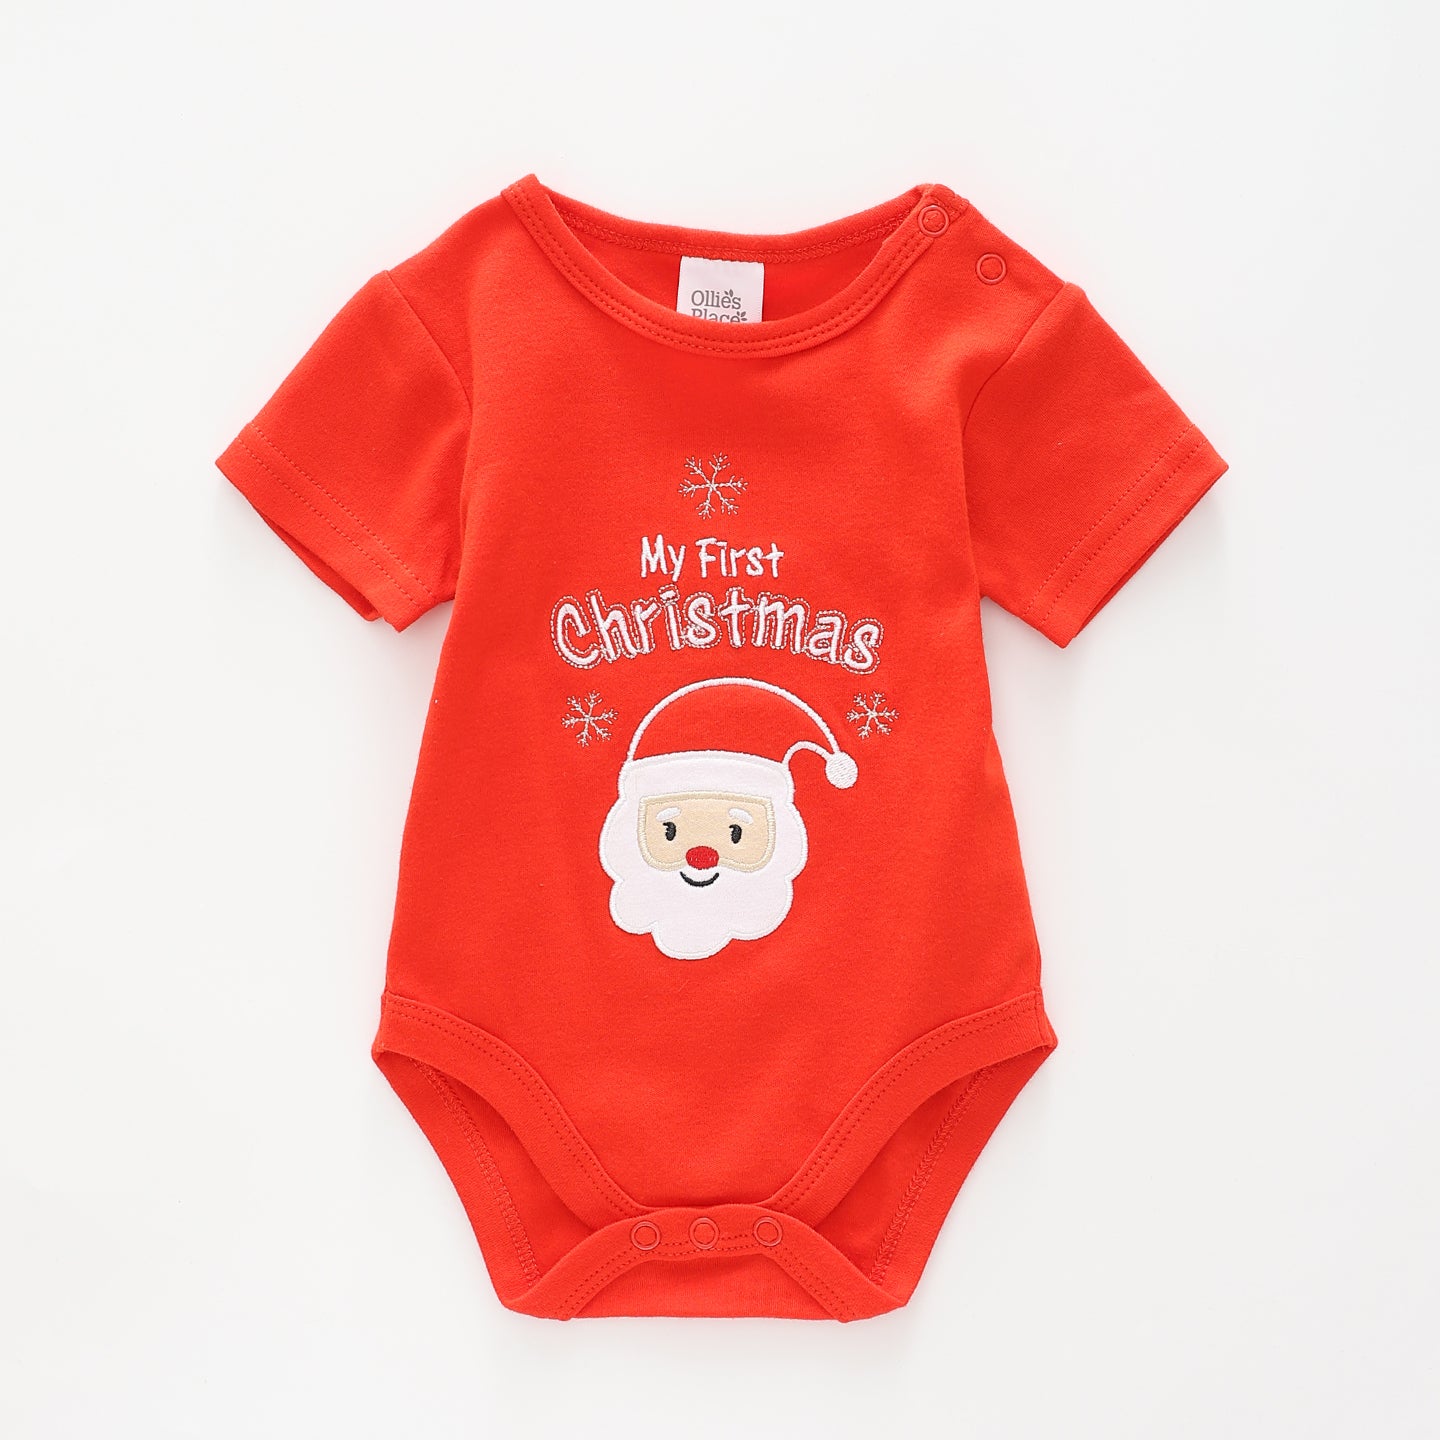 Baby's First Christmas Red Bodysuit